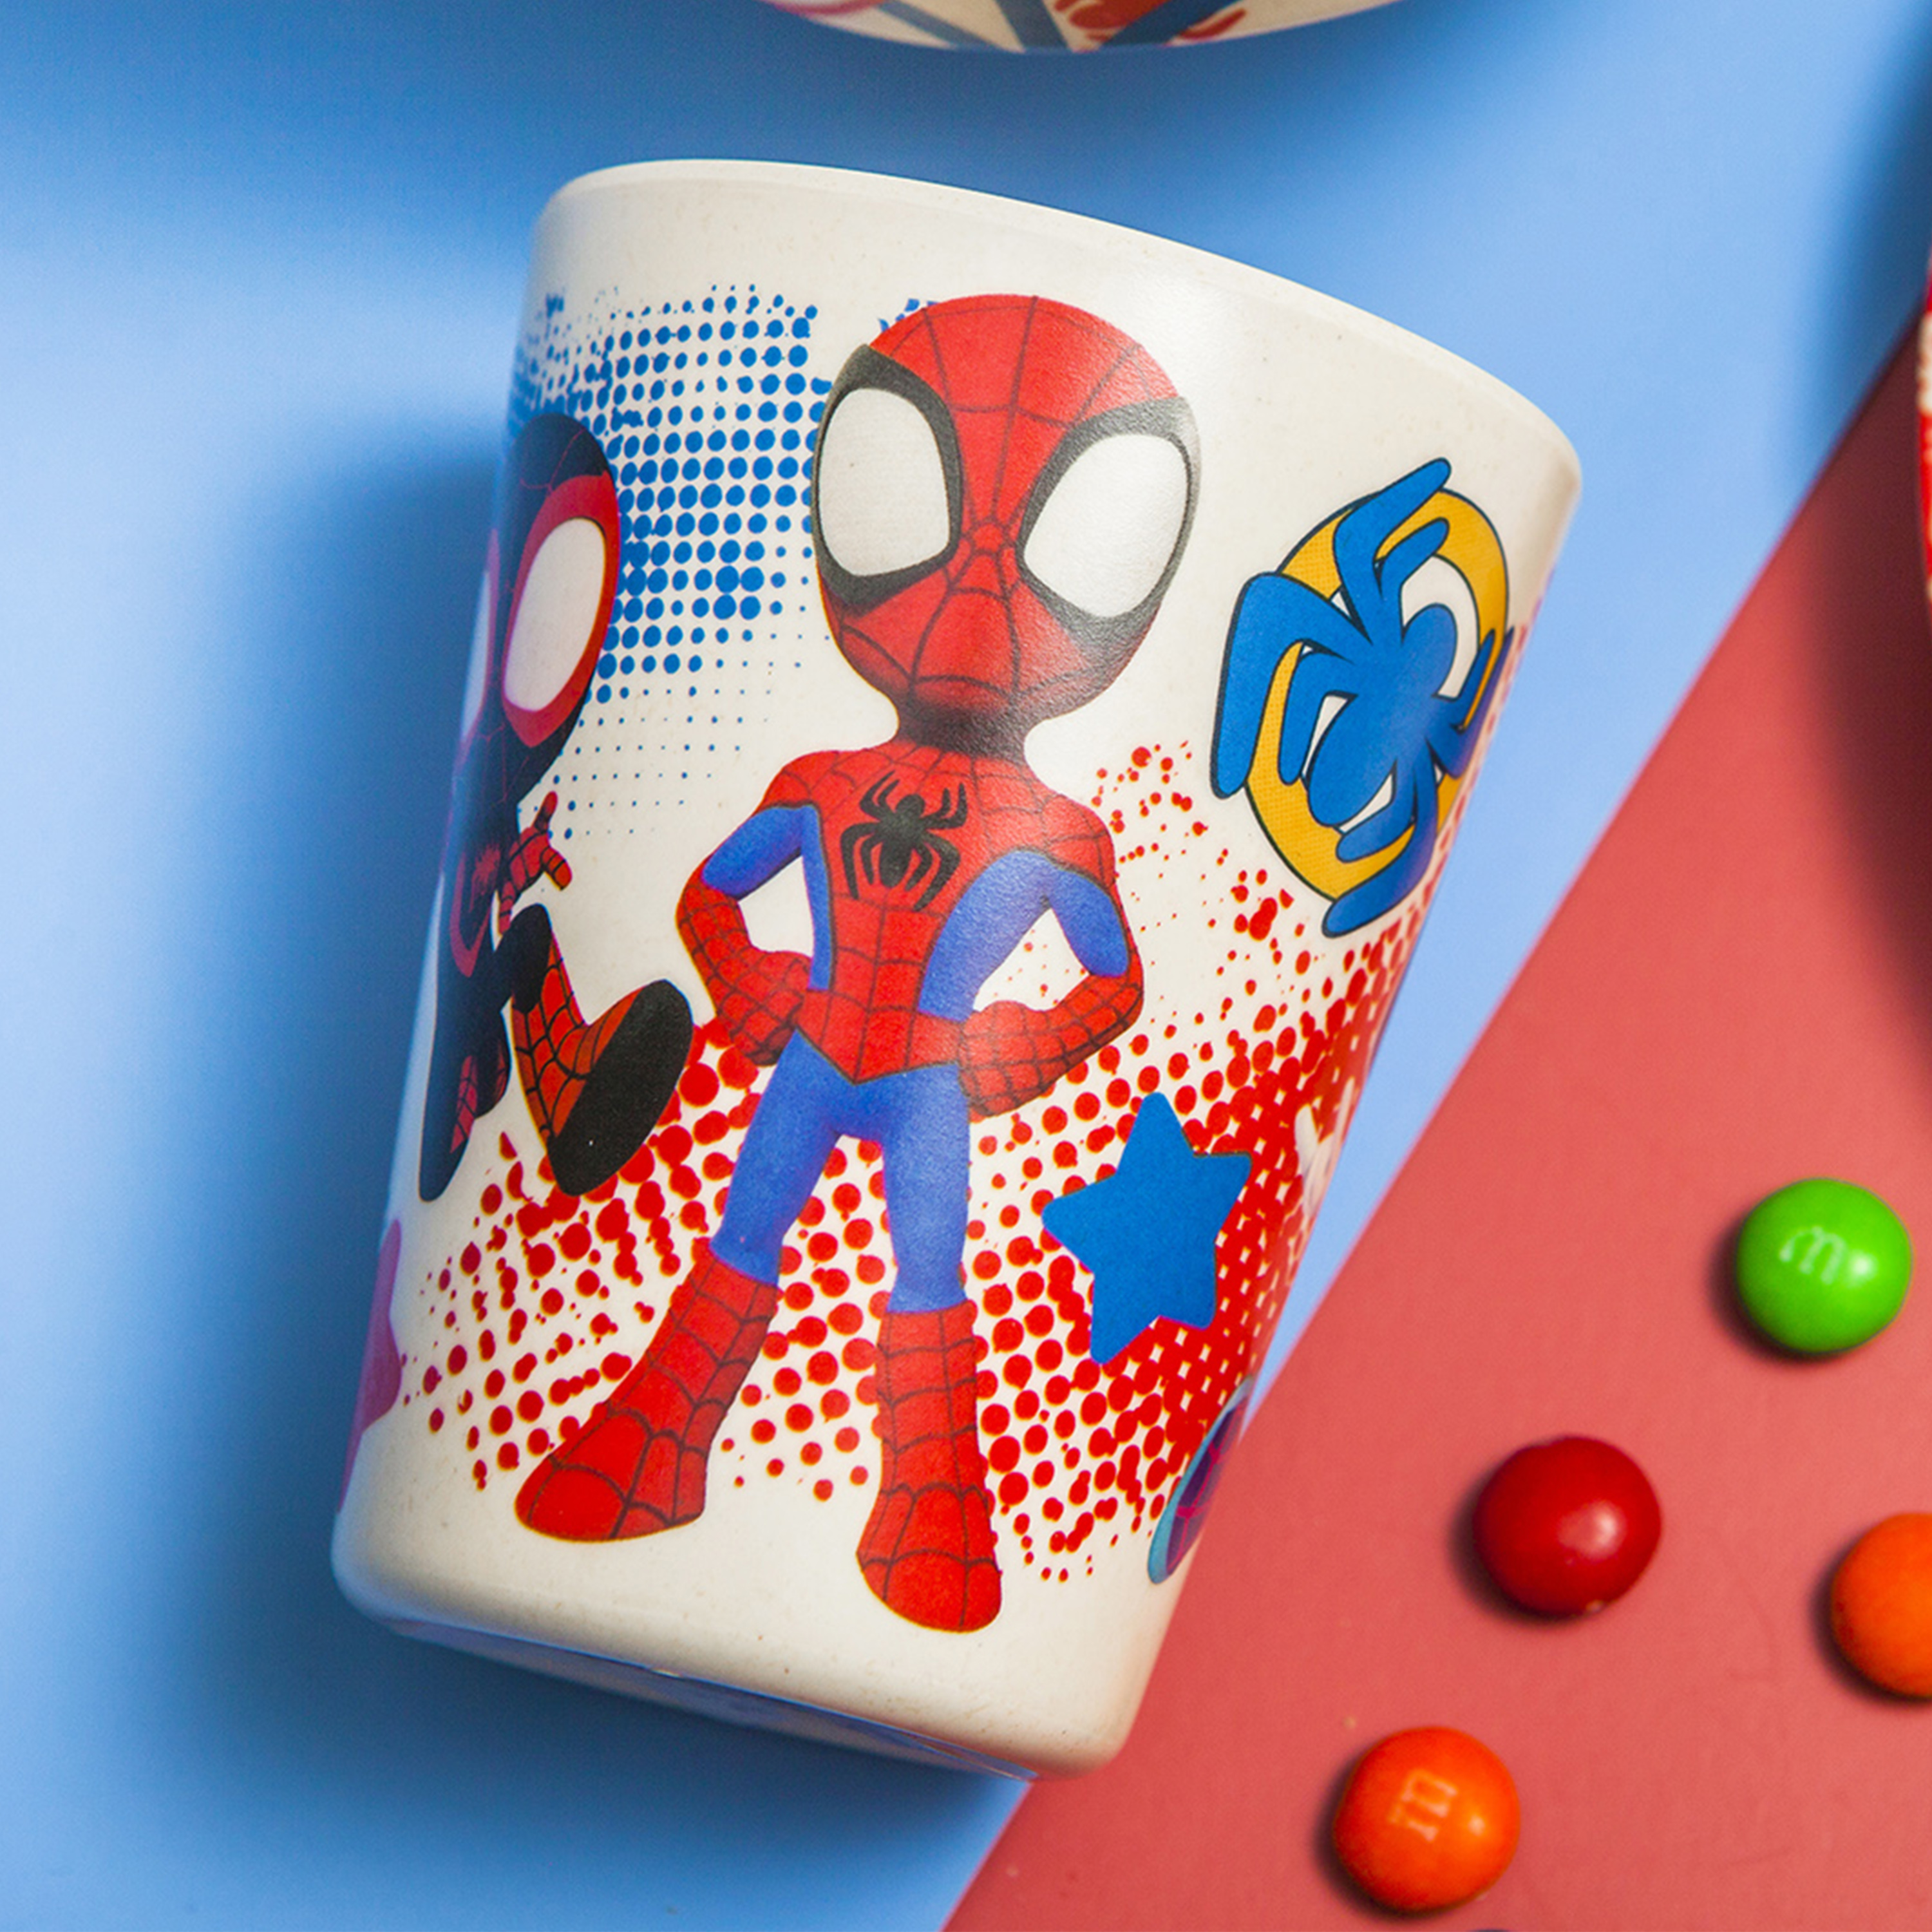 Spider-Man and His Amazing Friends Kids 3-piece Dinnerware Set, Spider-Friends, 3-piece set slideshow image 2